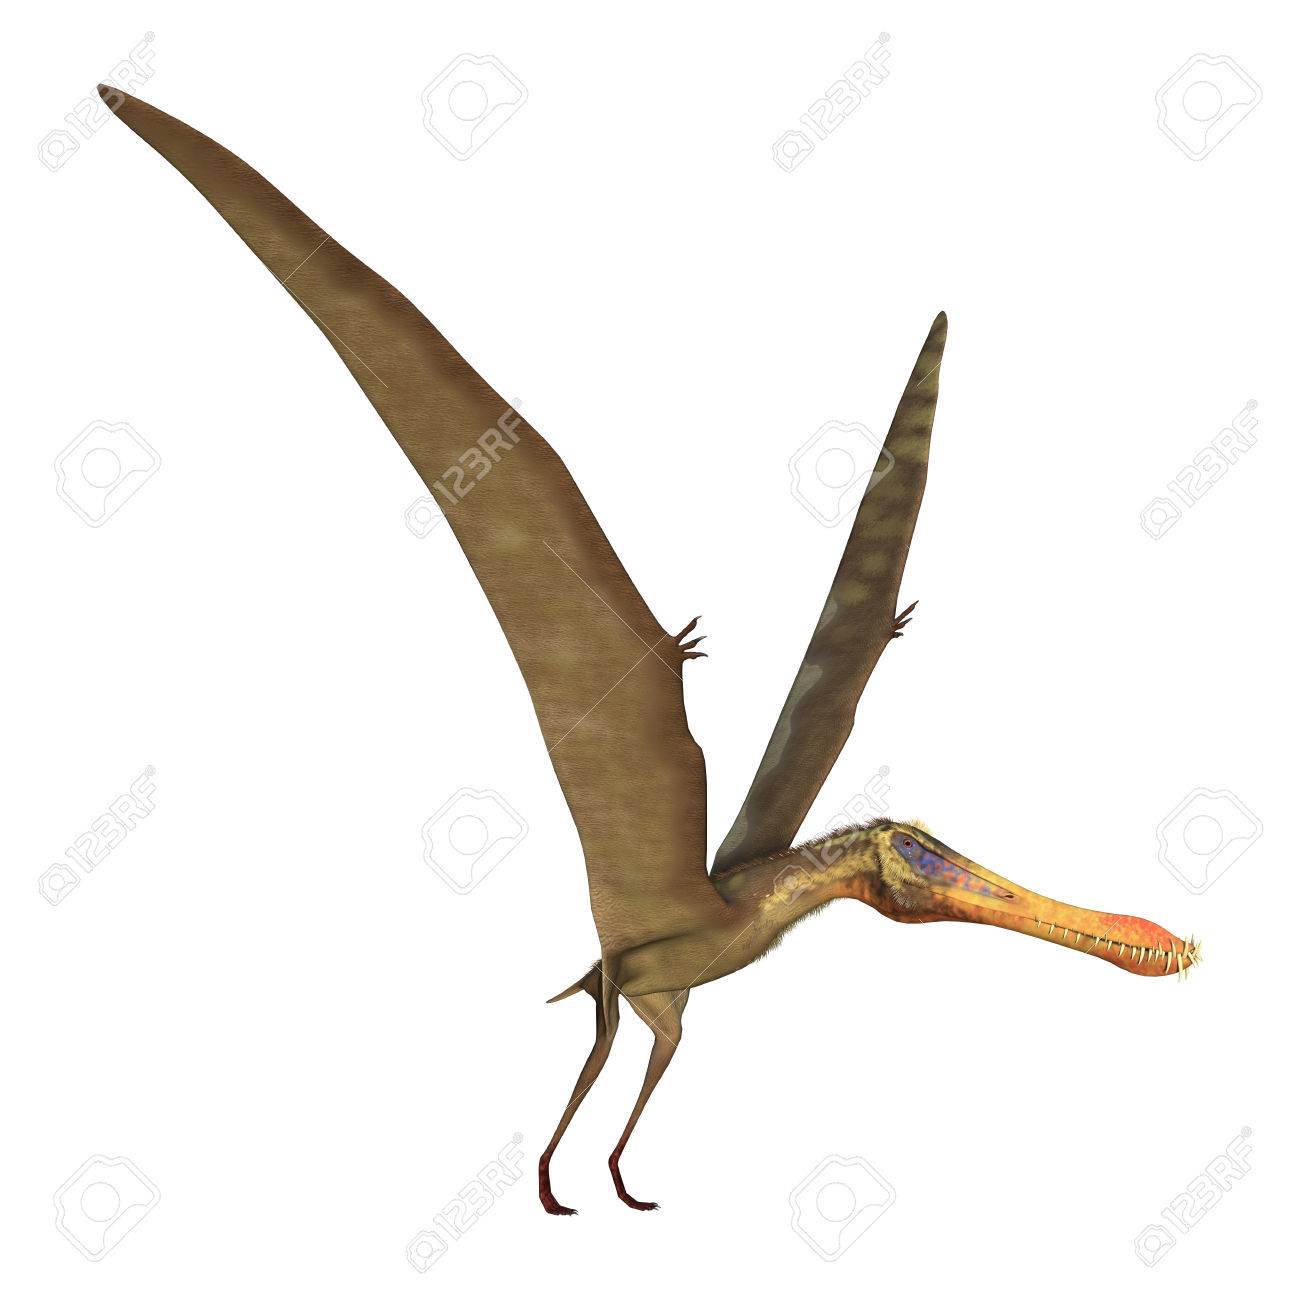 3d Rendering Of A Pterodactyl Anhanguera Isolated On White